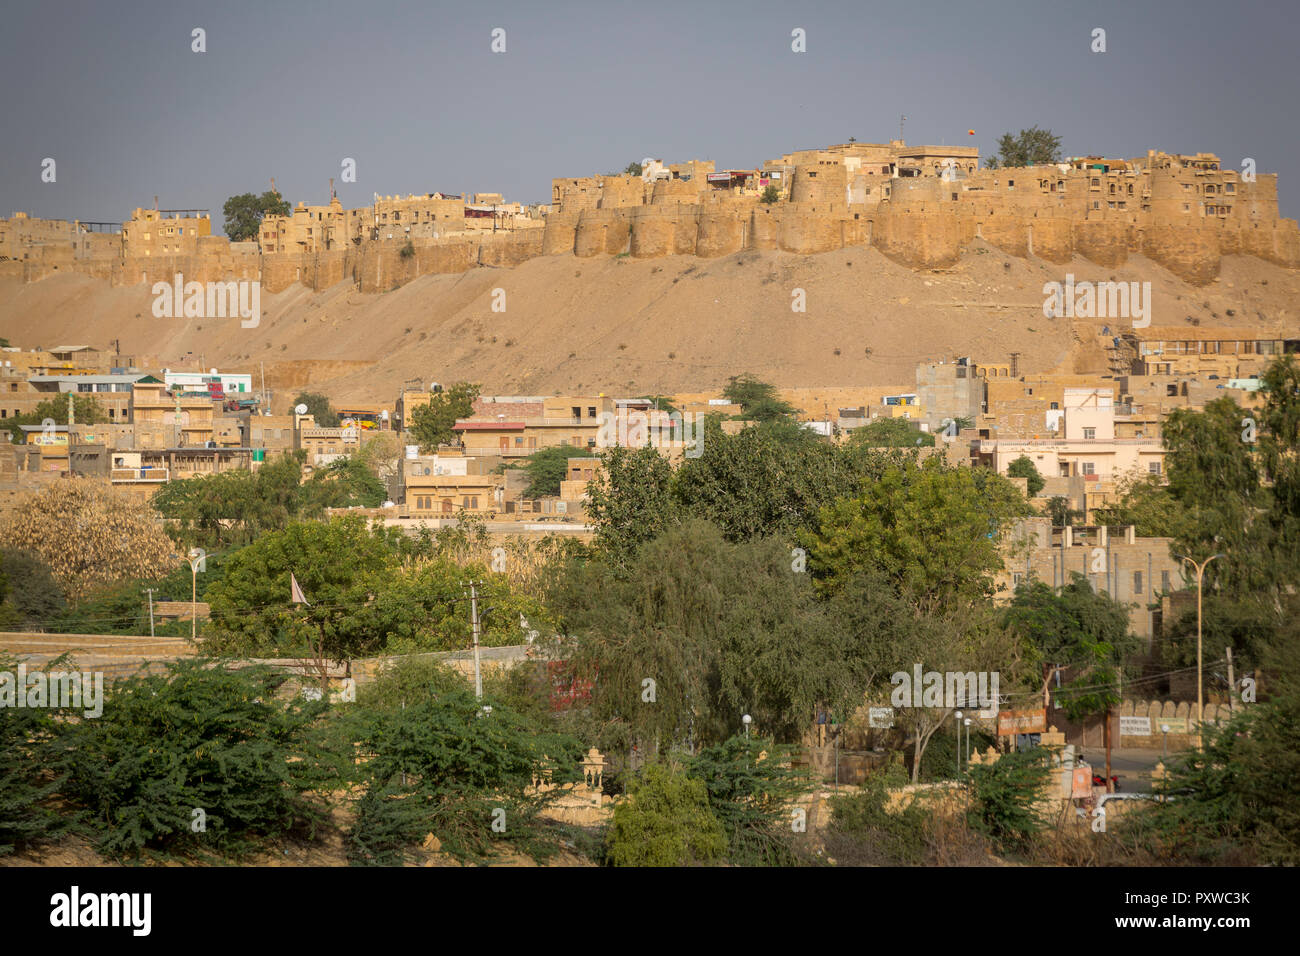 Distant view of the Jaisalmer Fort int he desert state of Rajasthan in western India Stock Photo